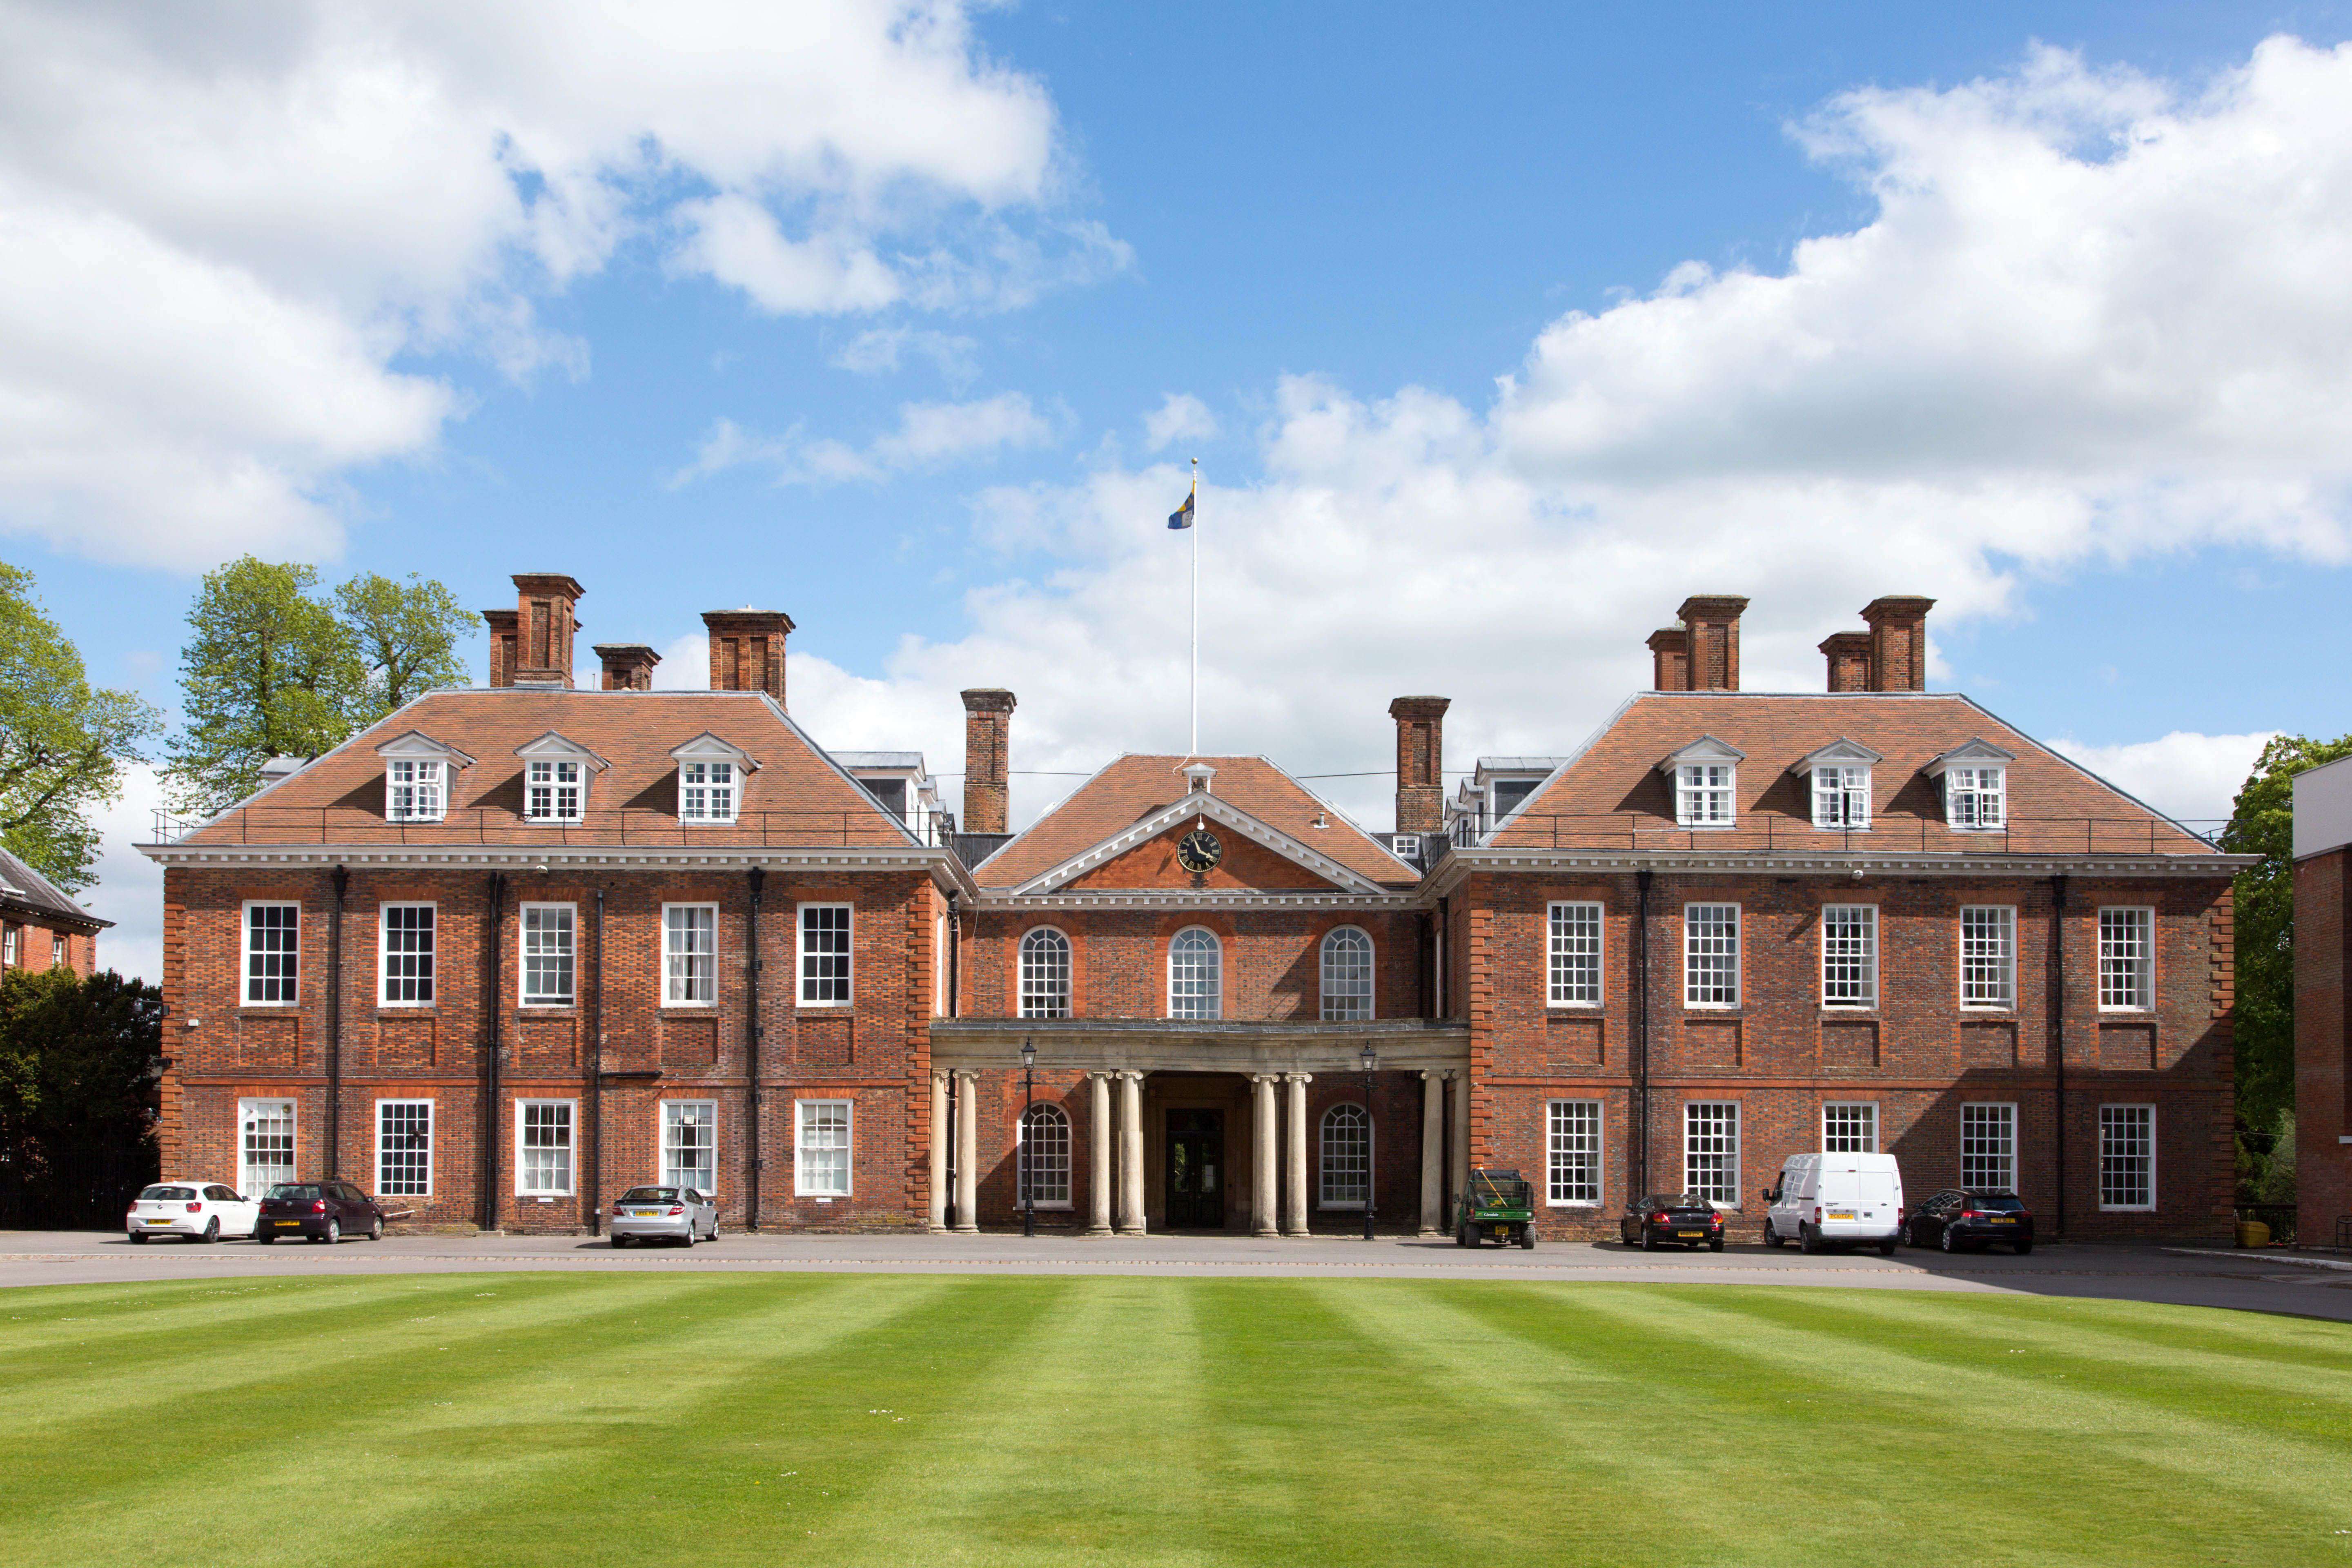 Marlborough College C1 Boarding House, North Elevation from Court